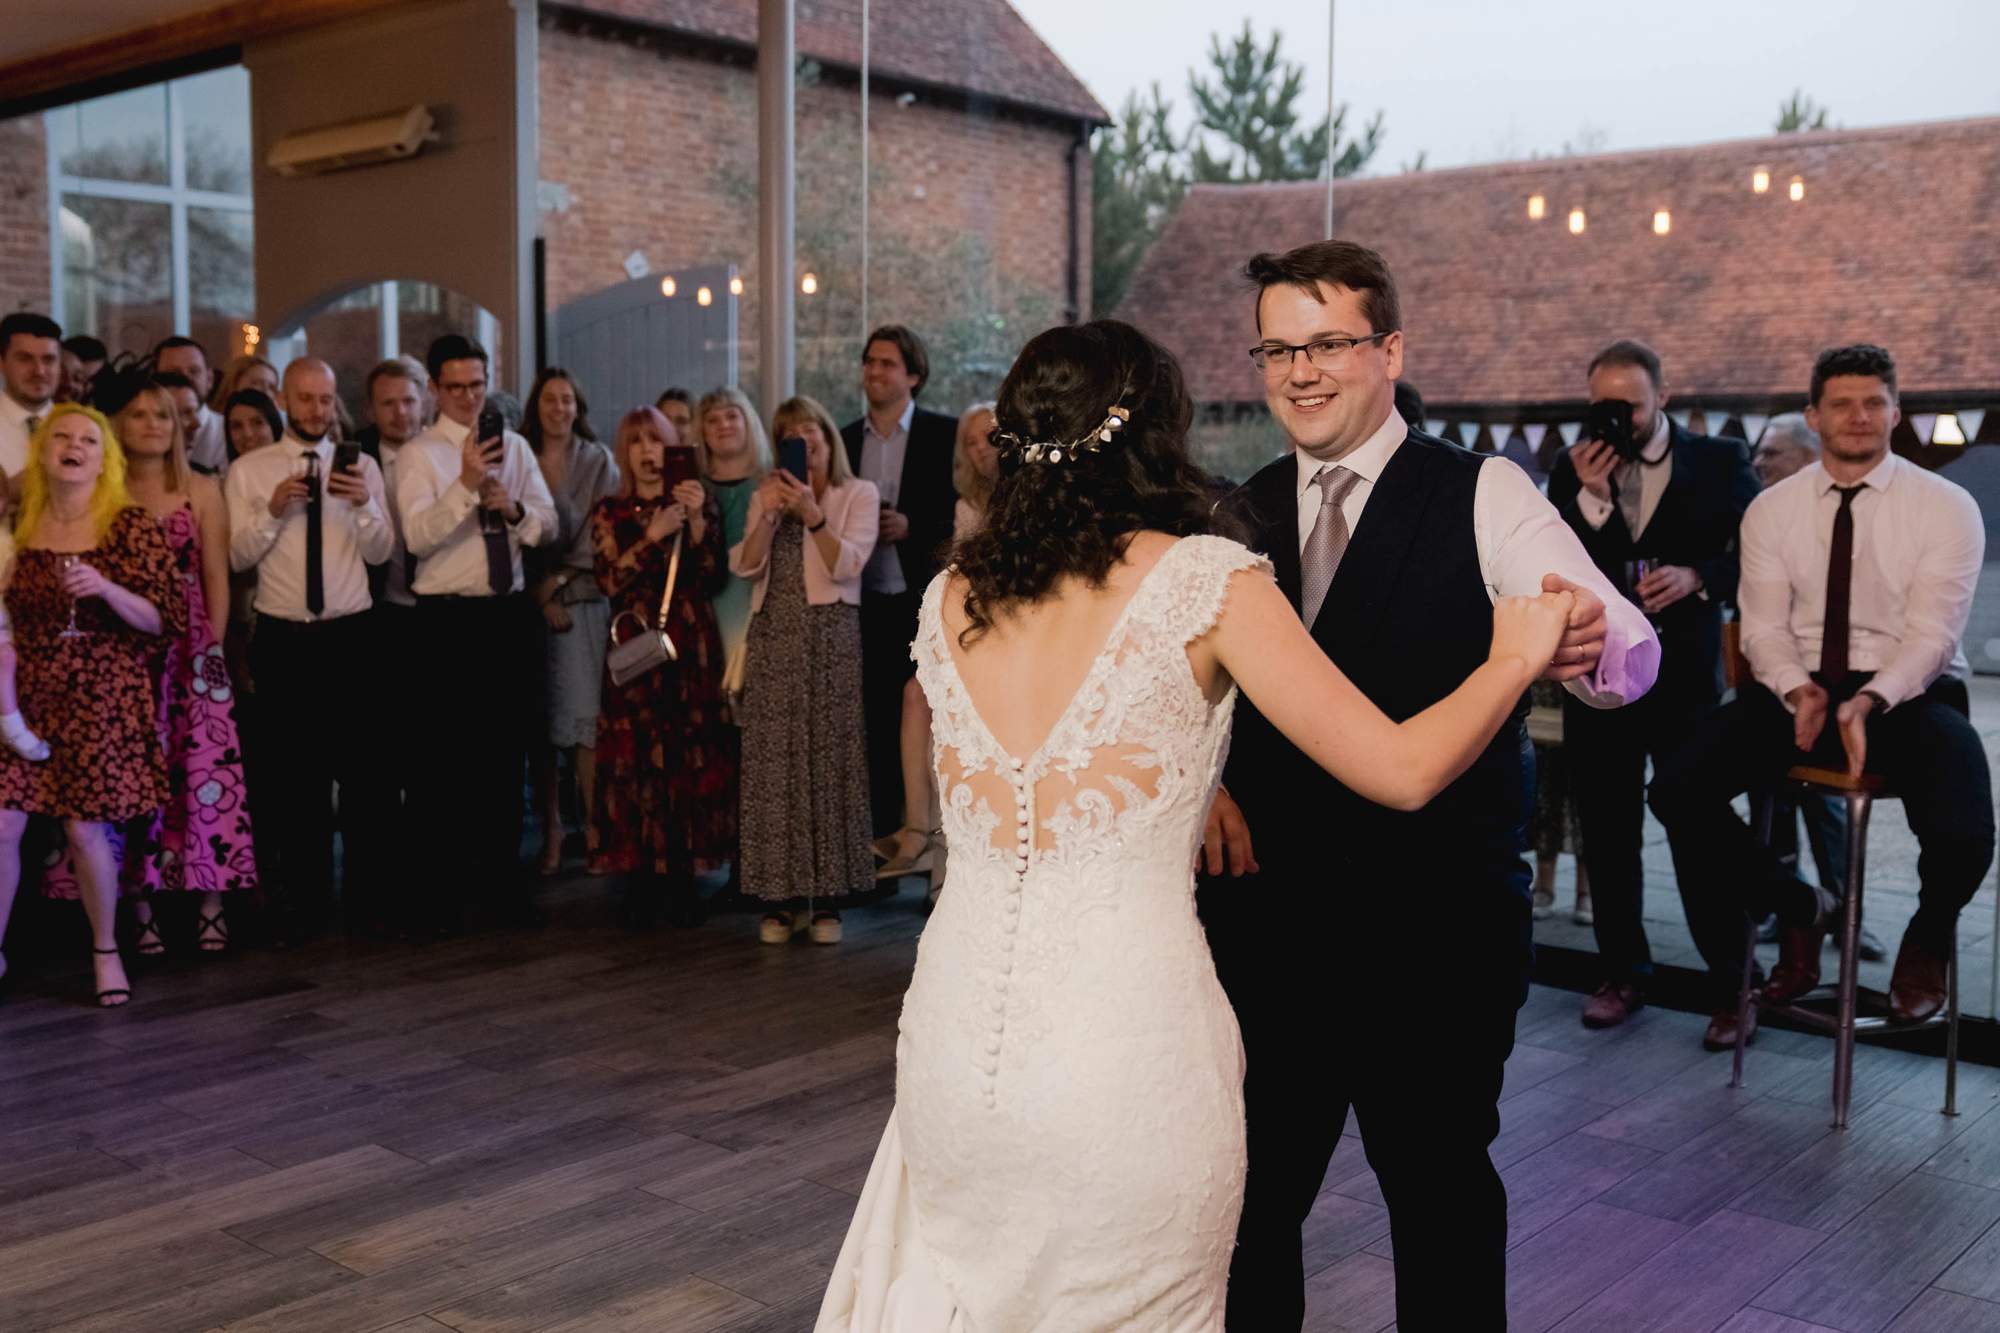 Bride and groom have their first dance together on their wedding day at Swallows Nest Barn in Warwickshire.